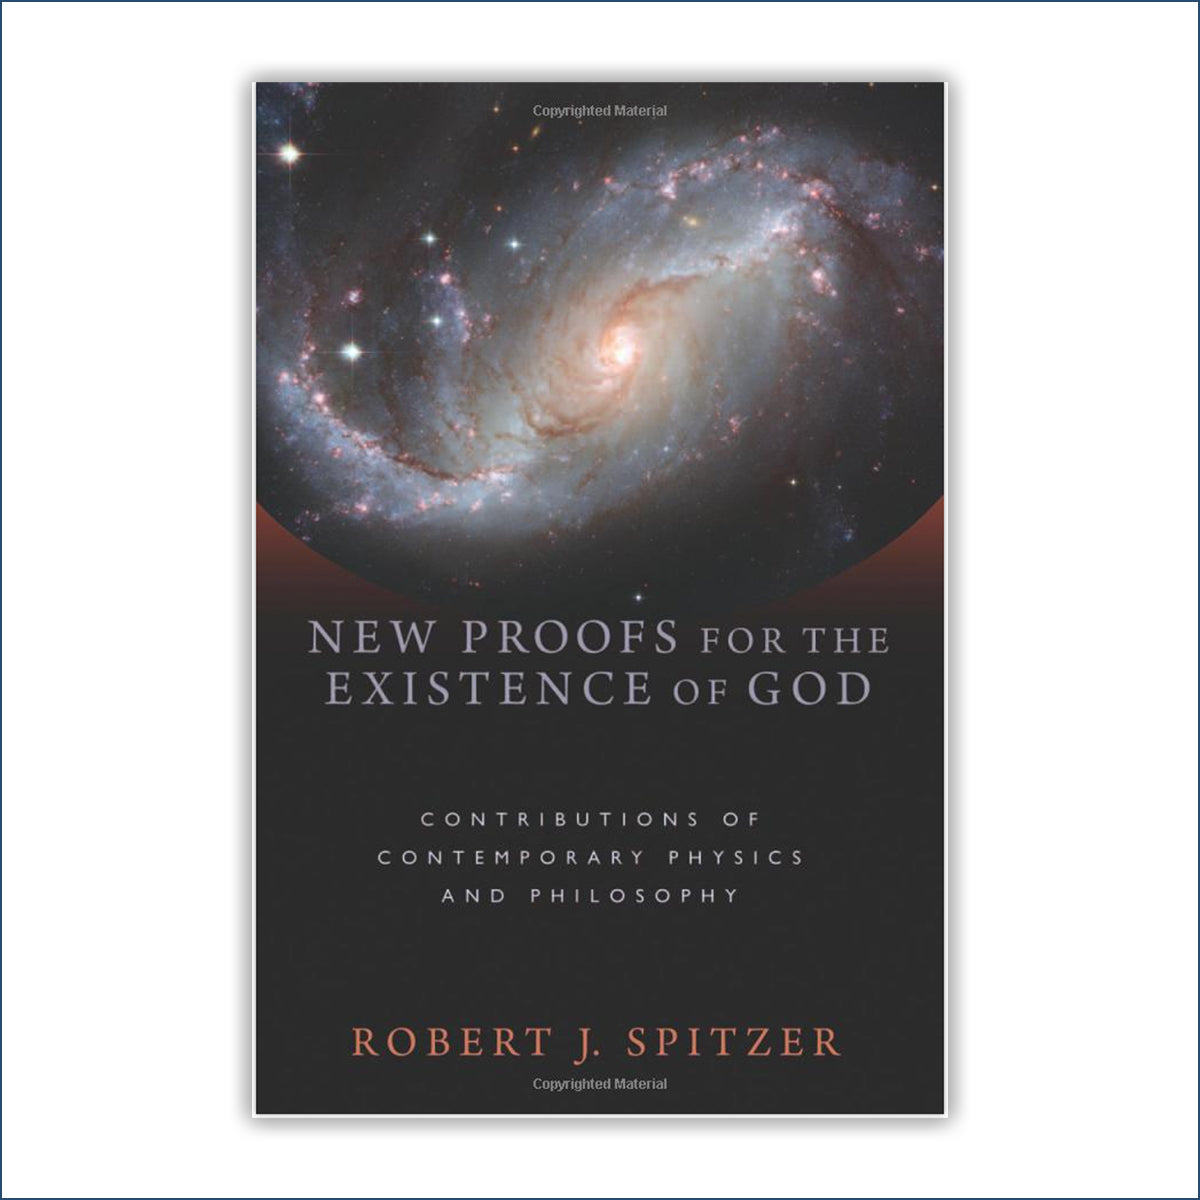 New Proofs for the Existence of God